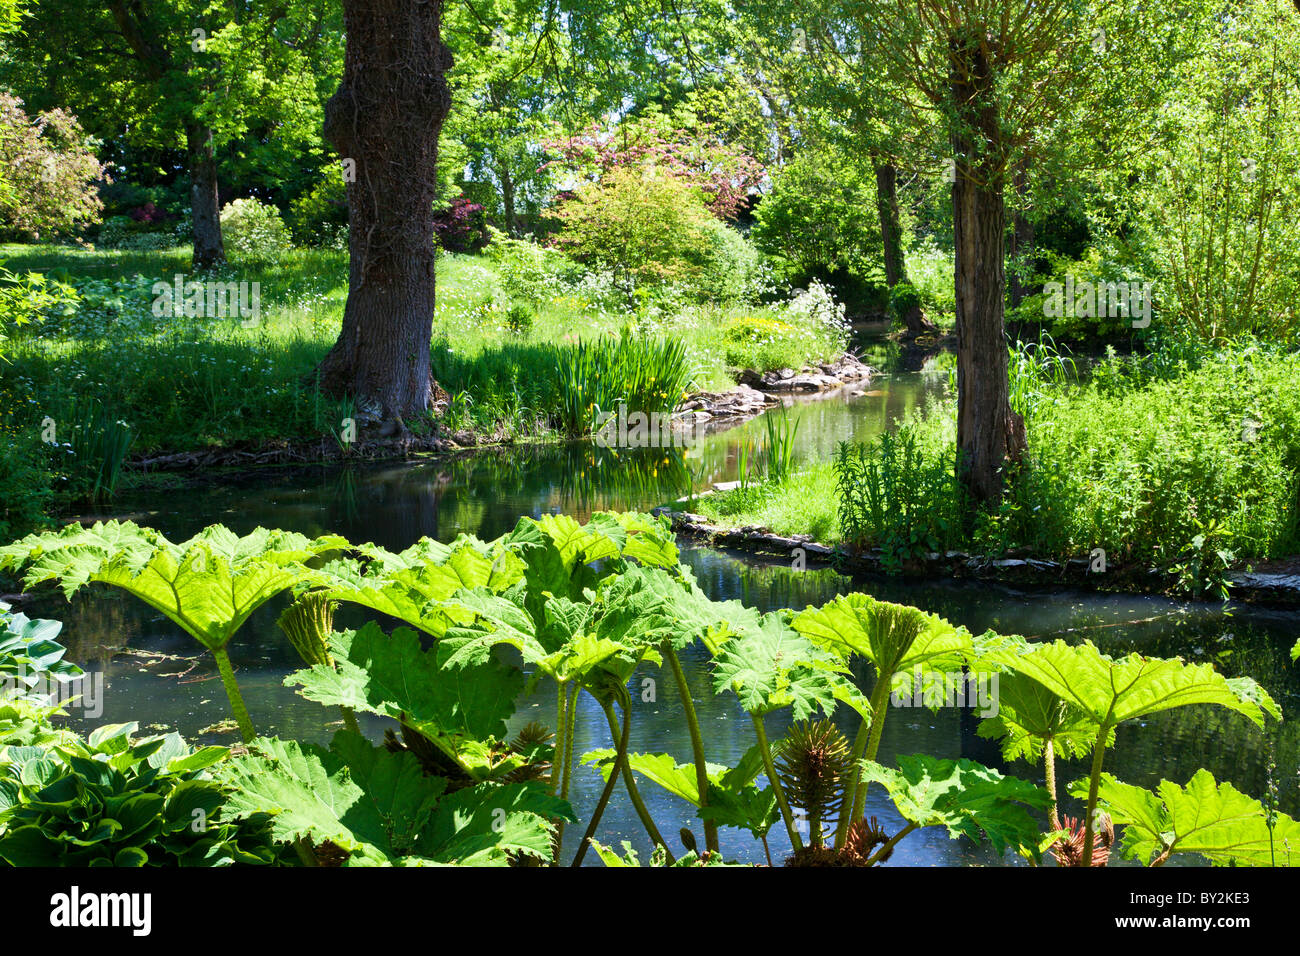 A small shady stream and pond with Chile Rhubarb or Gunnera manicata in the foreground in an English country garden in summer Stock Photo